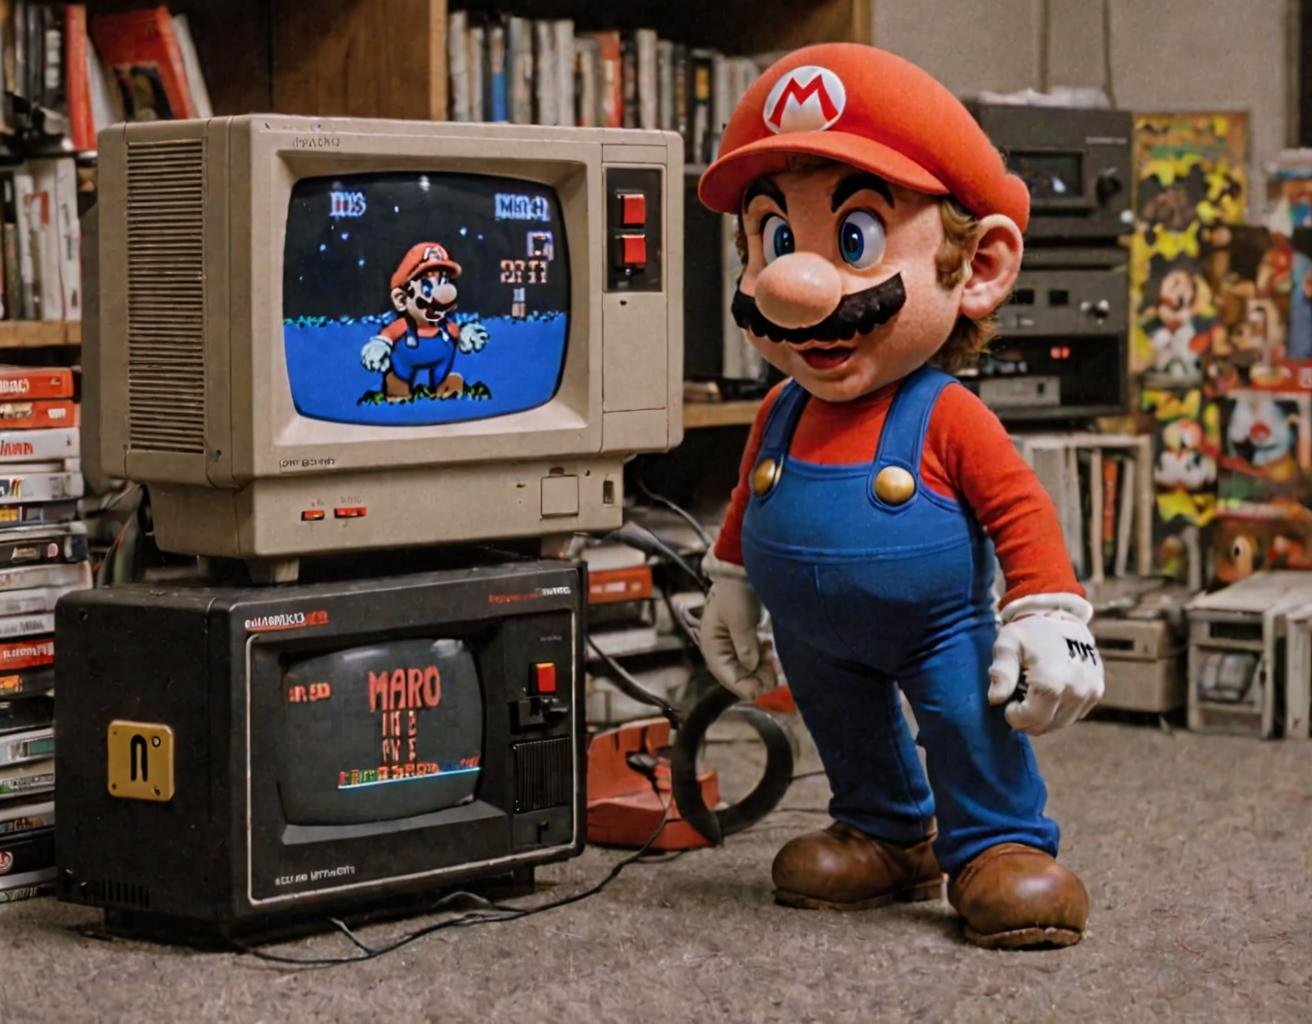 <lora:SMB Artstyle - V1 - Trigger is SMB Artstyle:1> VHS footage of NES Super Mario Brothers video game, 1986, featuring Sony Trinitron television, smb artstyle. 